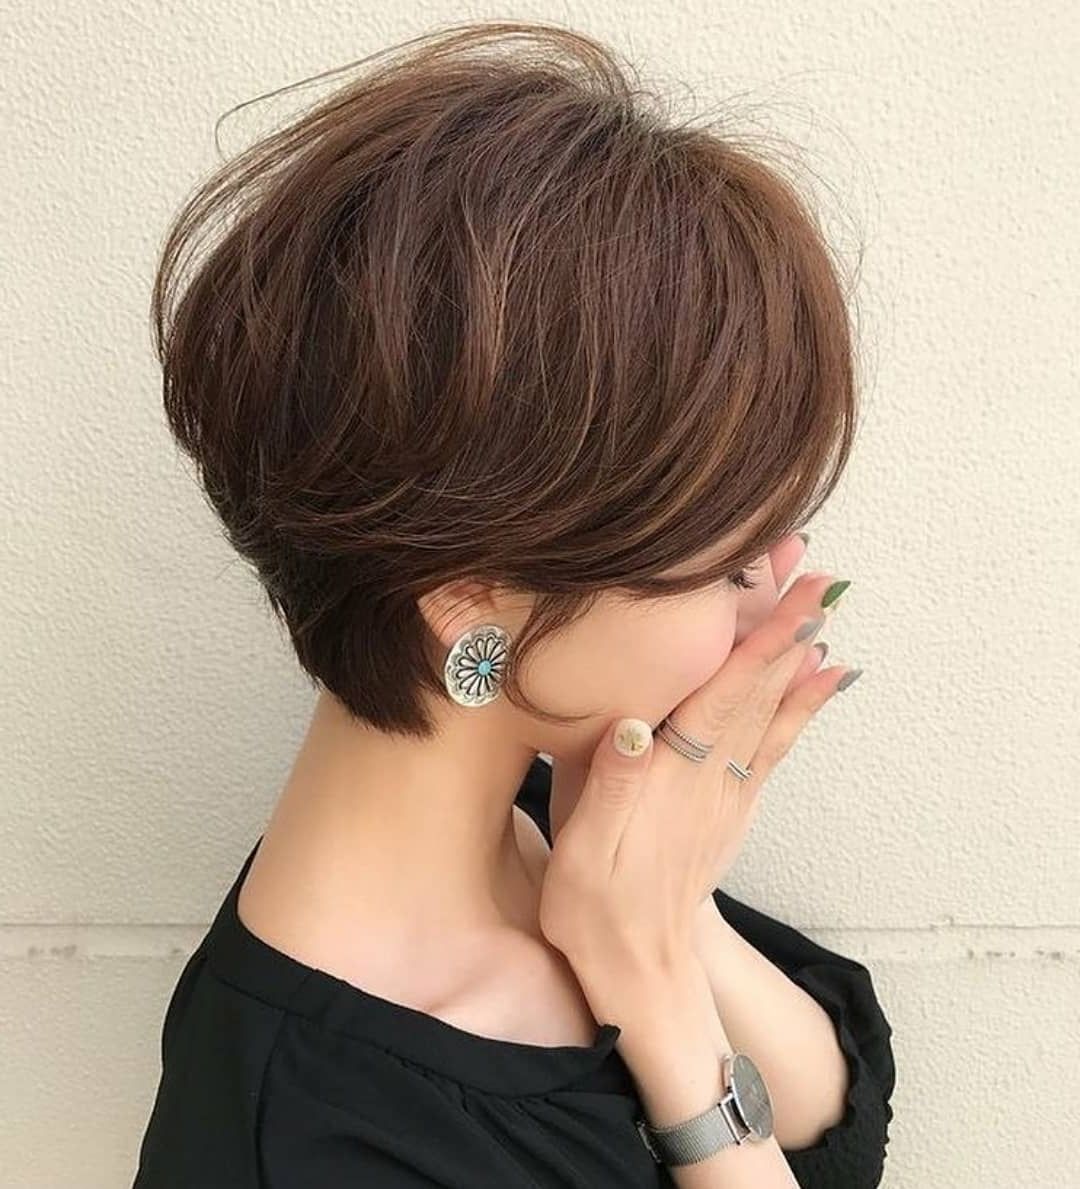 Cute Short Hairstyles And Haircuts For Young Girl – Popular Haircuts Throughout Short Hairstyles For Young Girls (View 2 of 25)